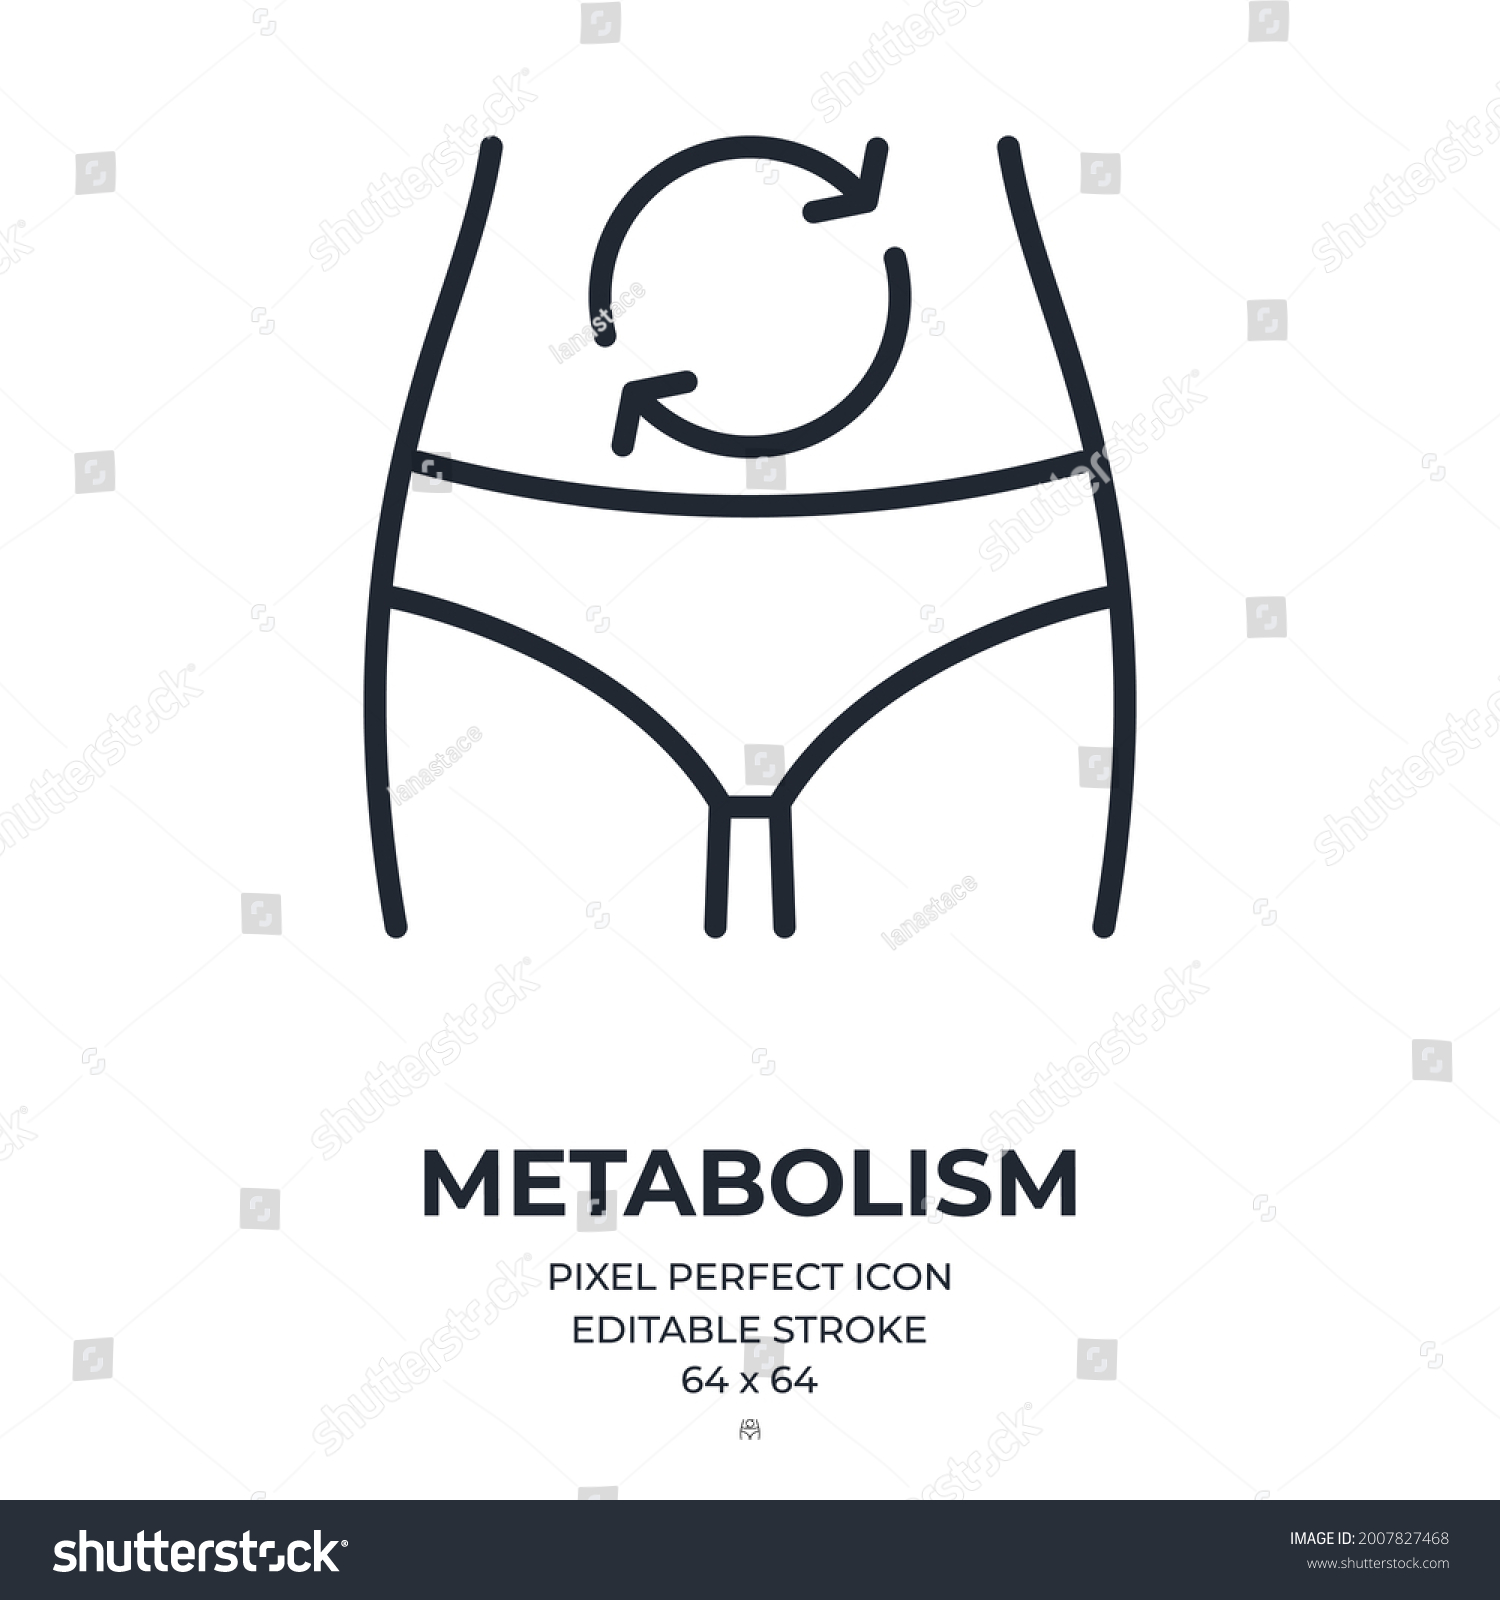 SVG of Metabolism or digestion process concept editable stroke outline icon isolated on white background flat vector illustration. Pixel perfect. 64 x 64. svg